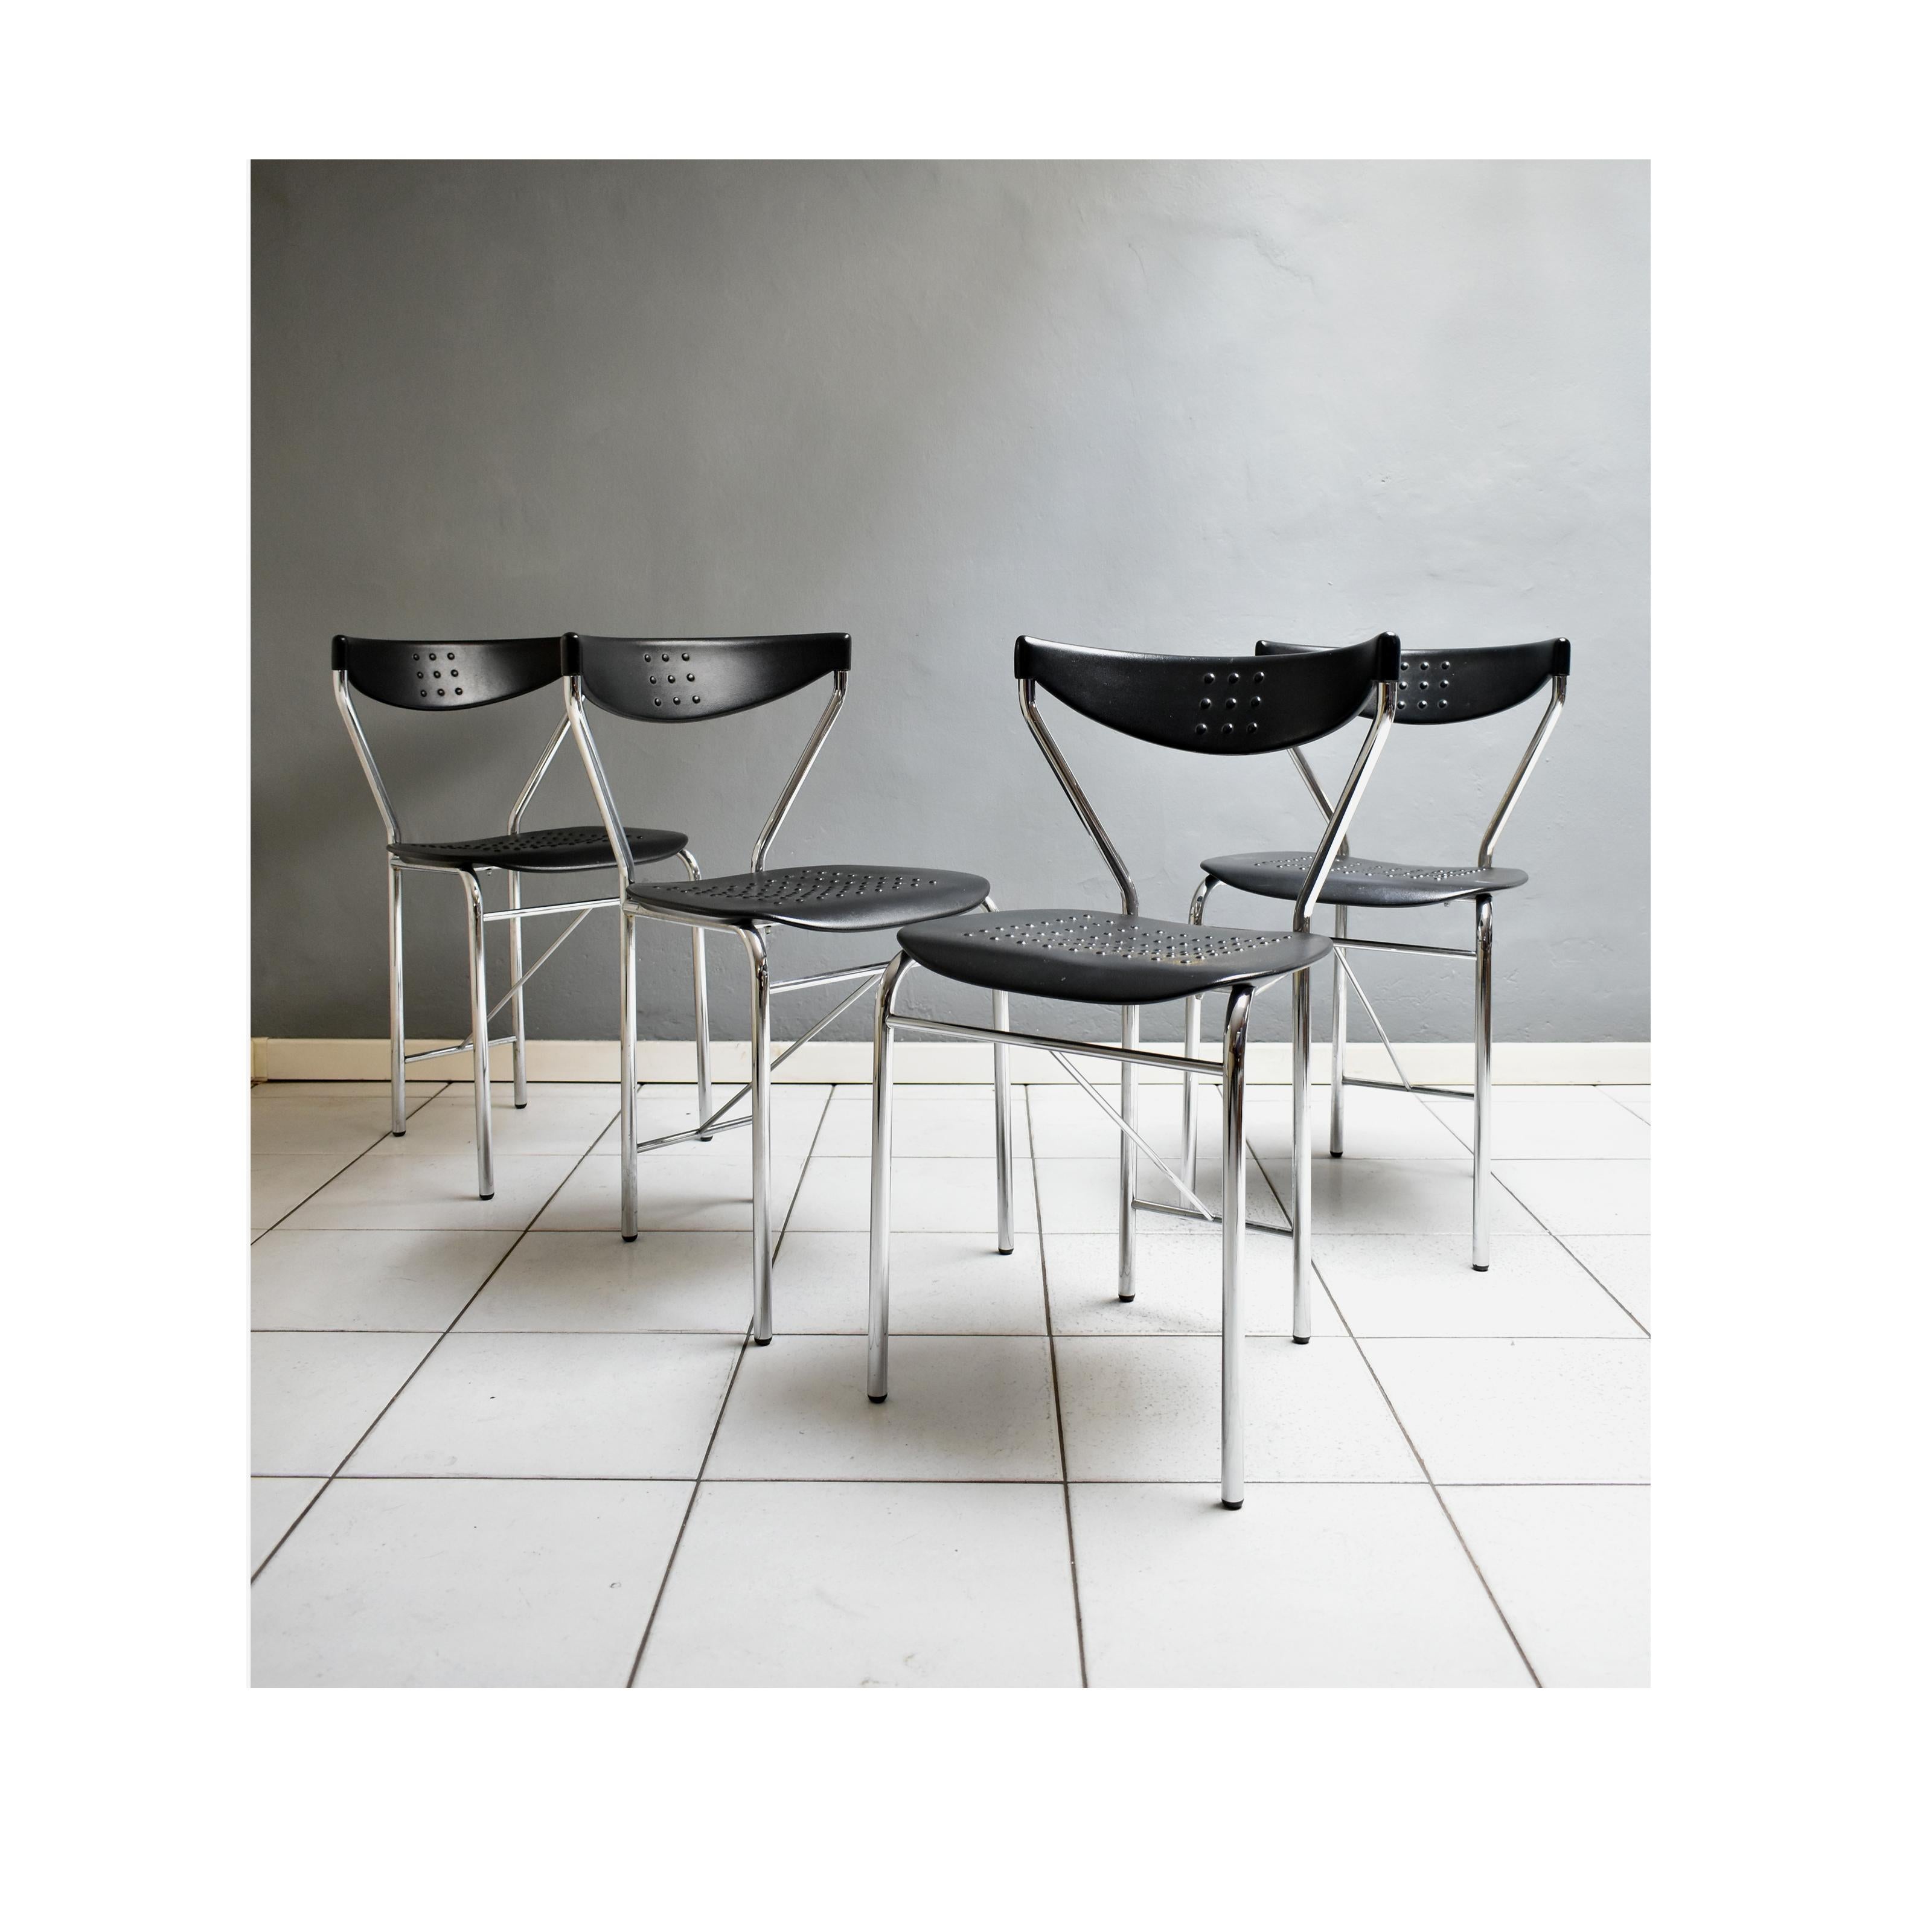 Set of four vintage Eighties chairs, Italian manufacture, design by Citterio cucine.
The chairs have a steel structure with seat and back in black rubber.
Excellent vintage condition however, they may show traces relating to time.
 